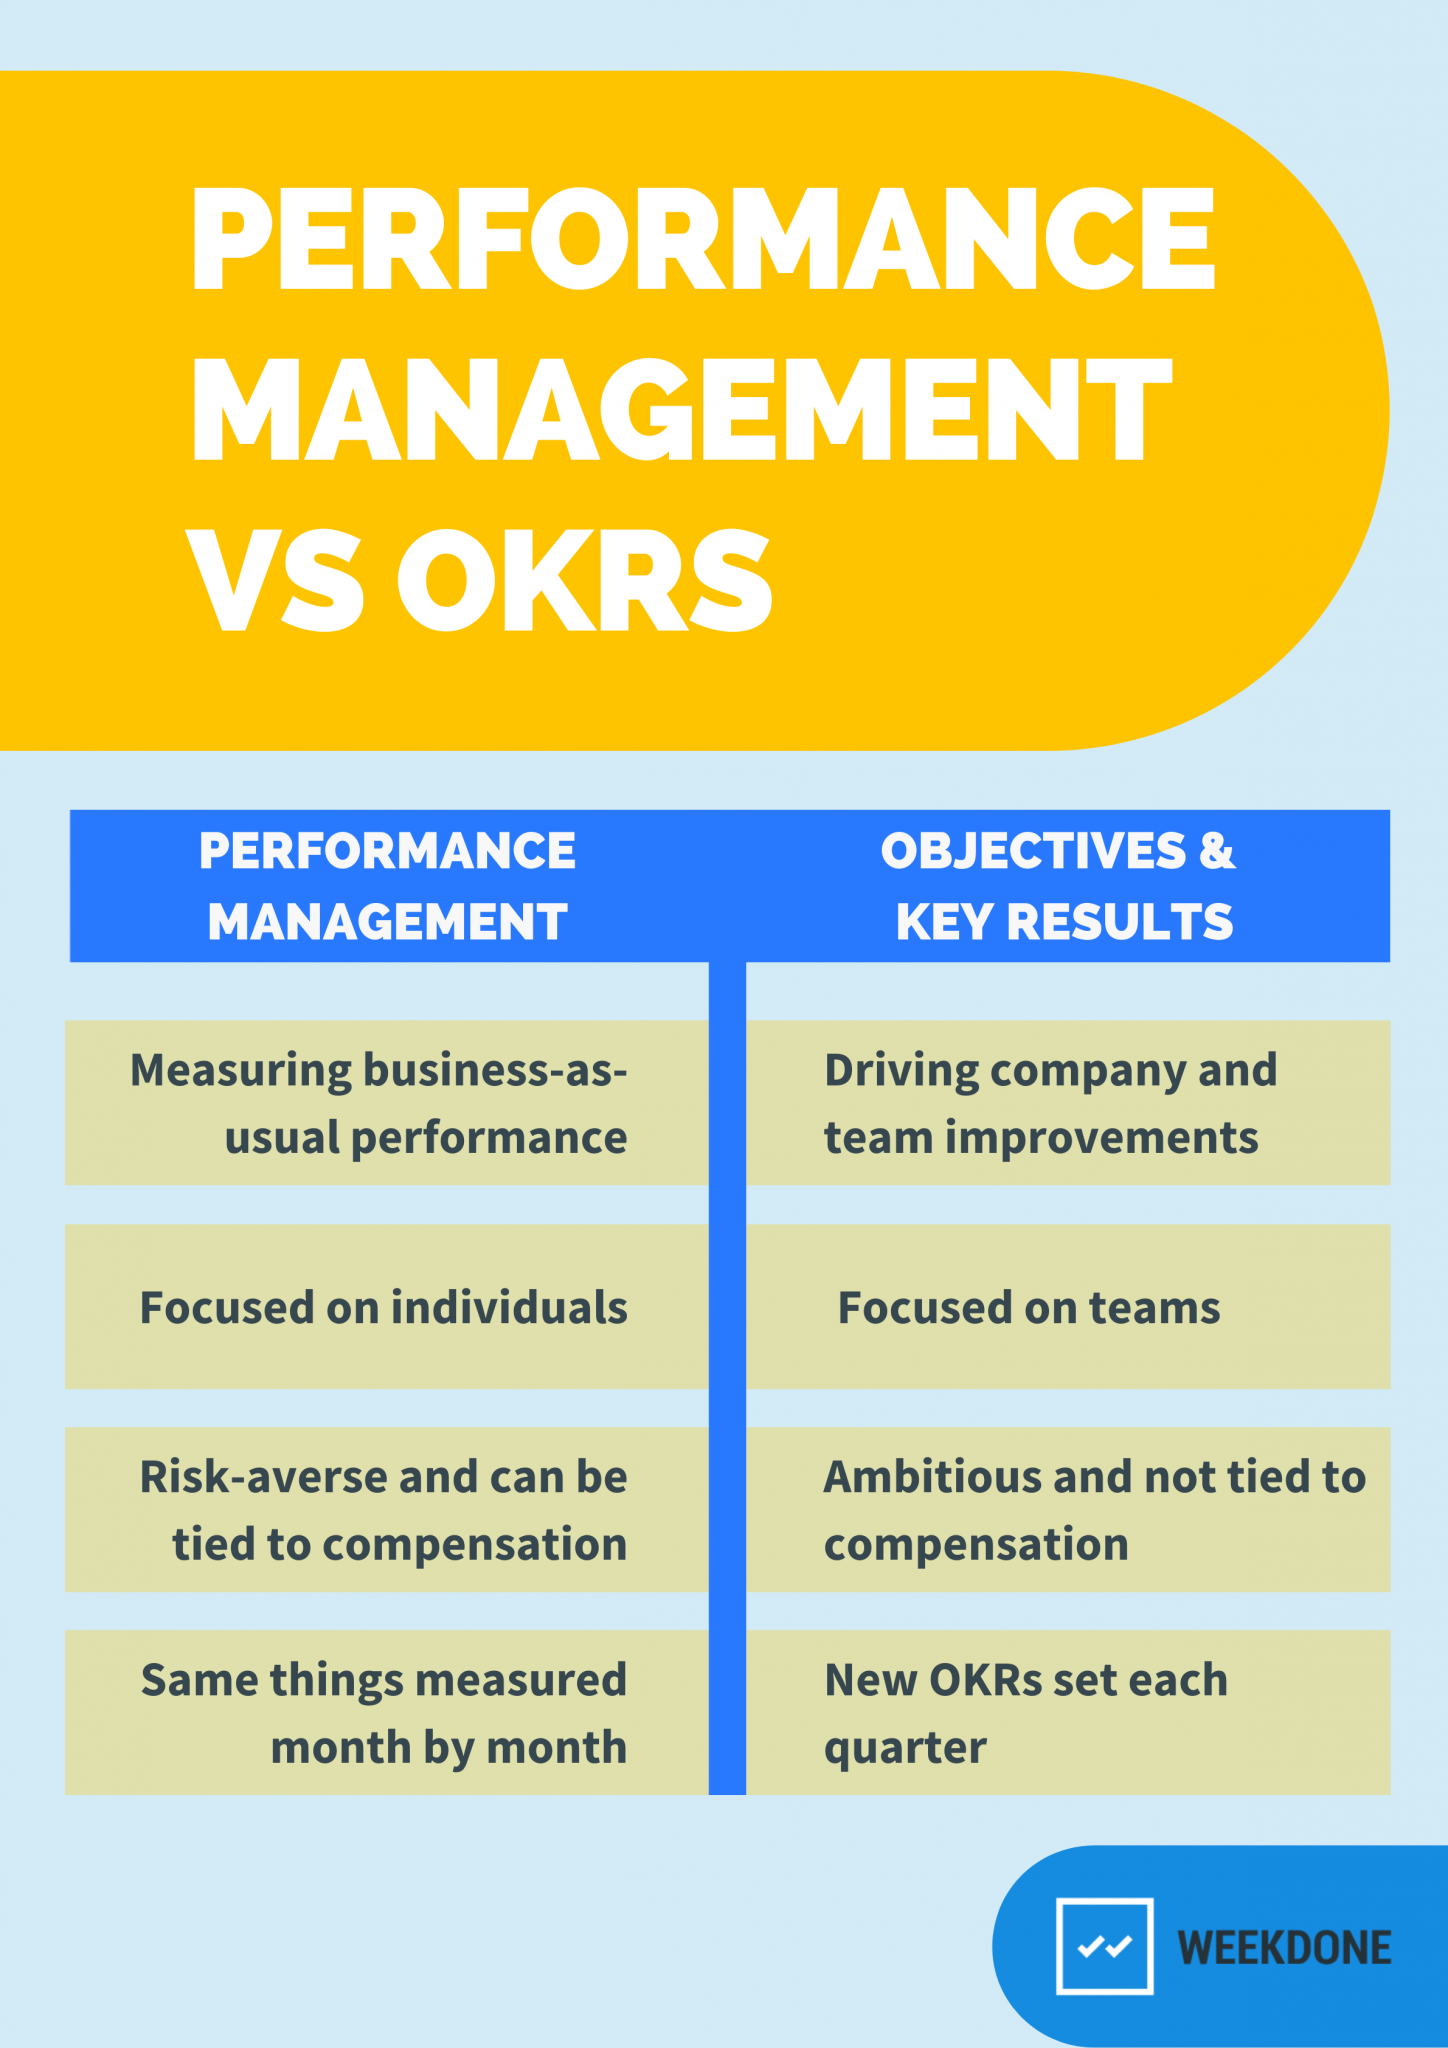 research on enterprise performance management from the perspective of okr